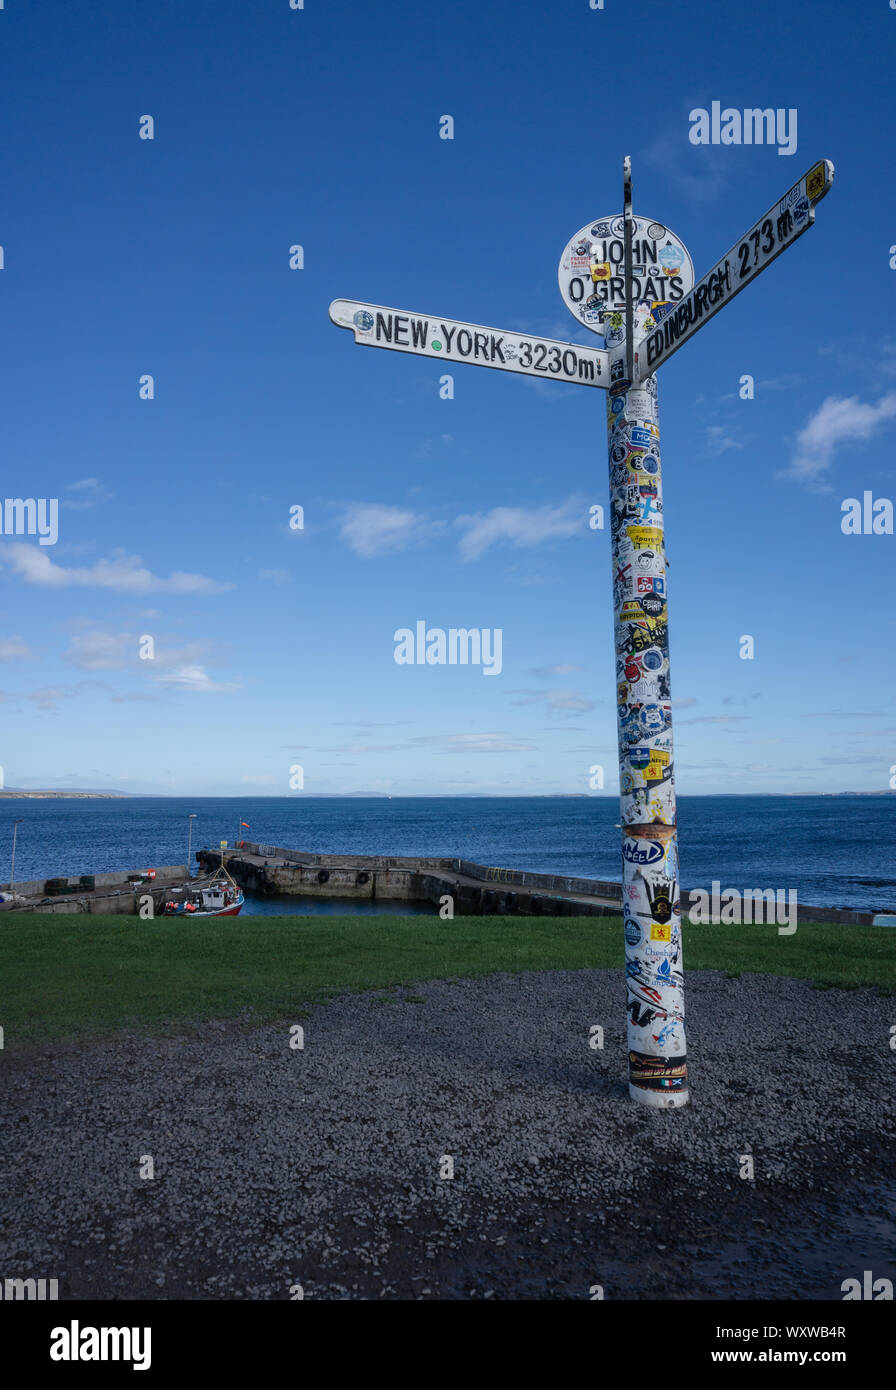 The famous signpost at John o'Groats, Scotland showing distances to New York and Edinburgh Stock Photo